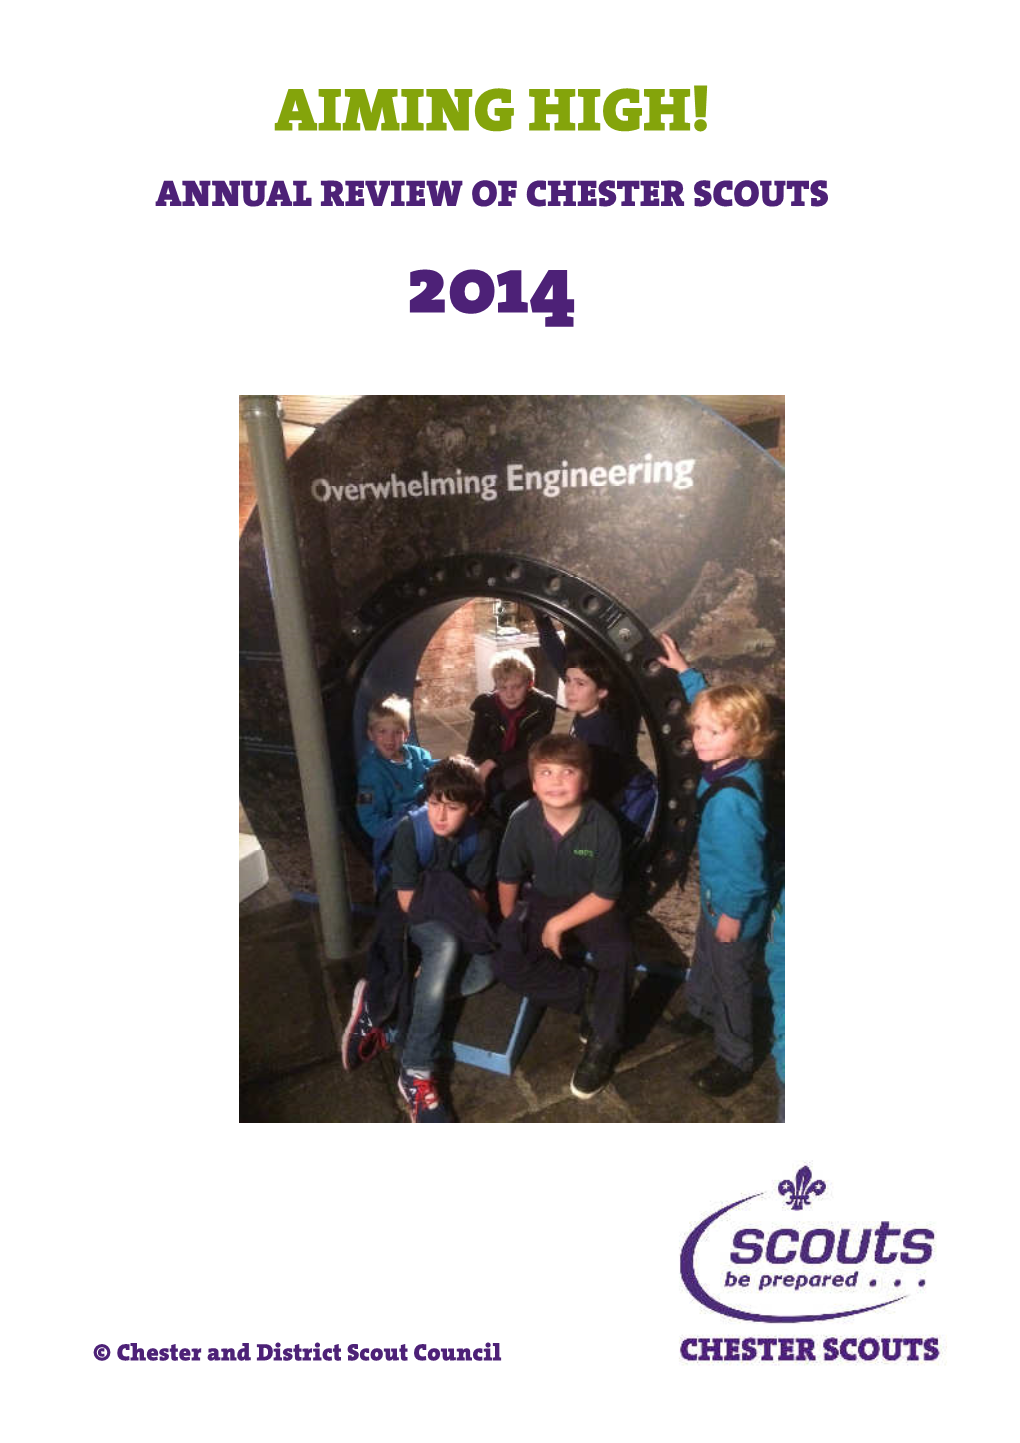 Aiming High! Annual Review of Chester Scouts 2014